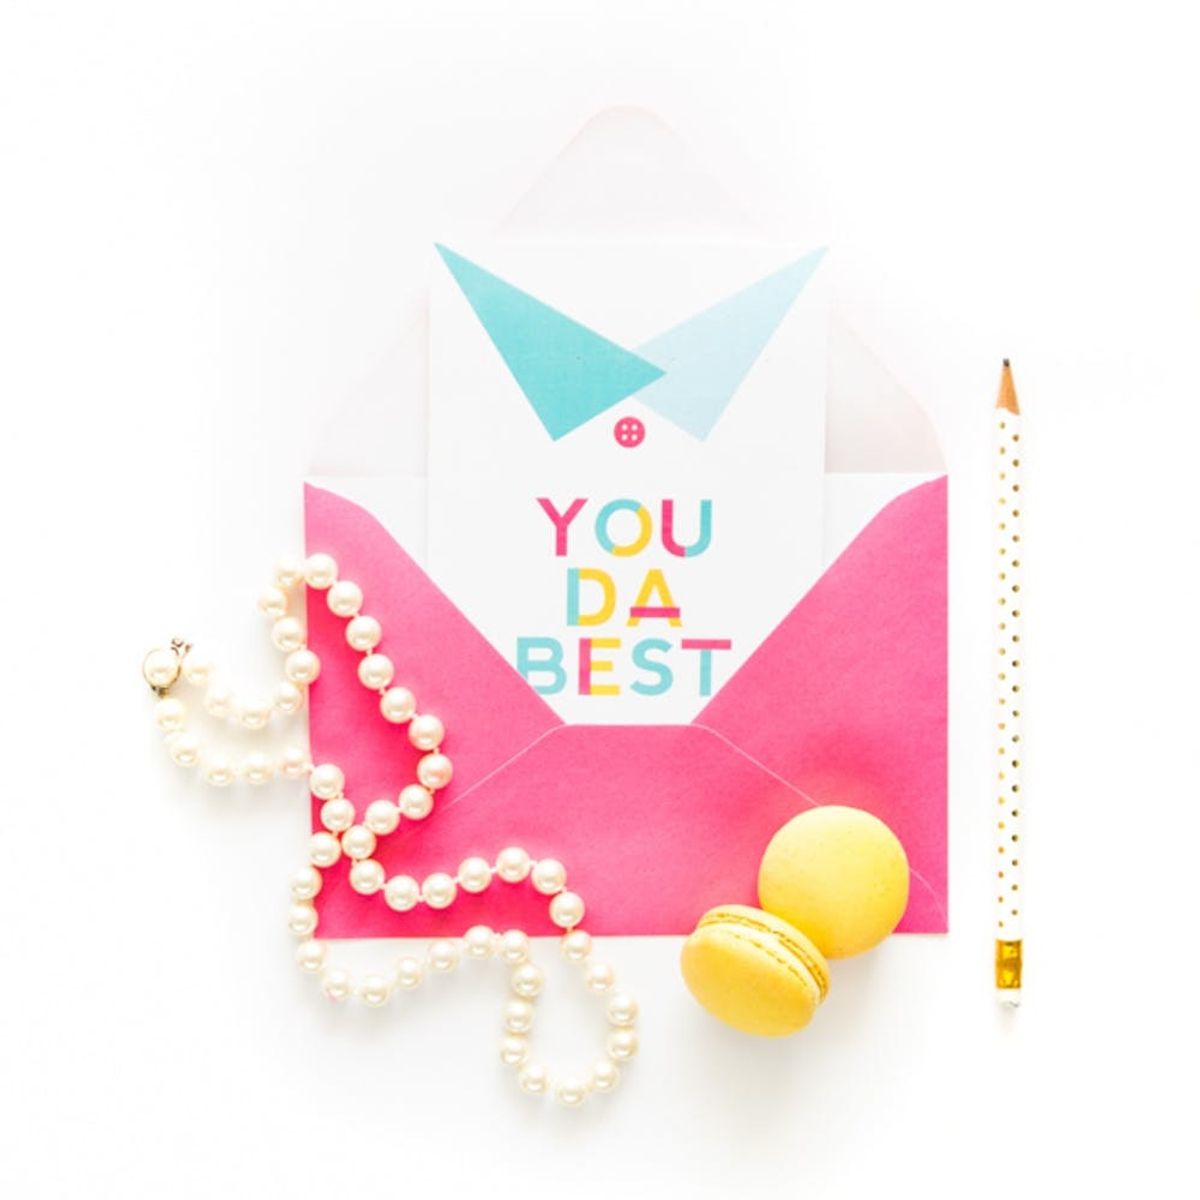 Send This Sweet Printable Card to Mom for Mother’s Day!